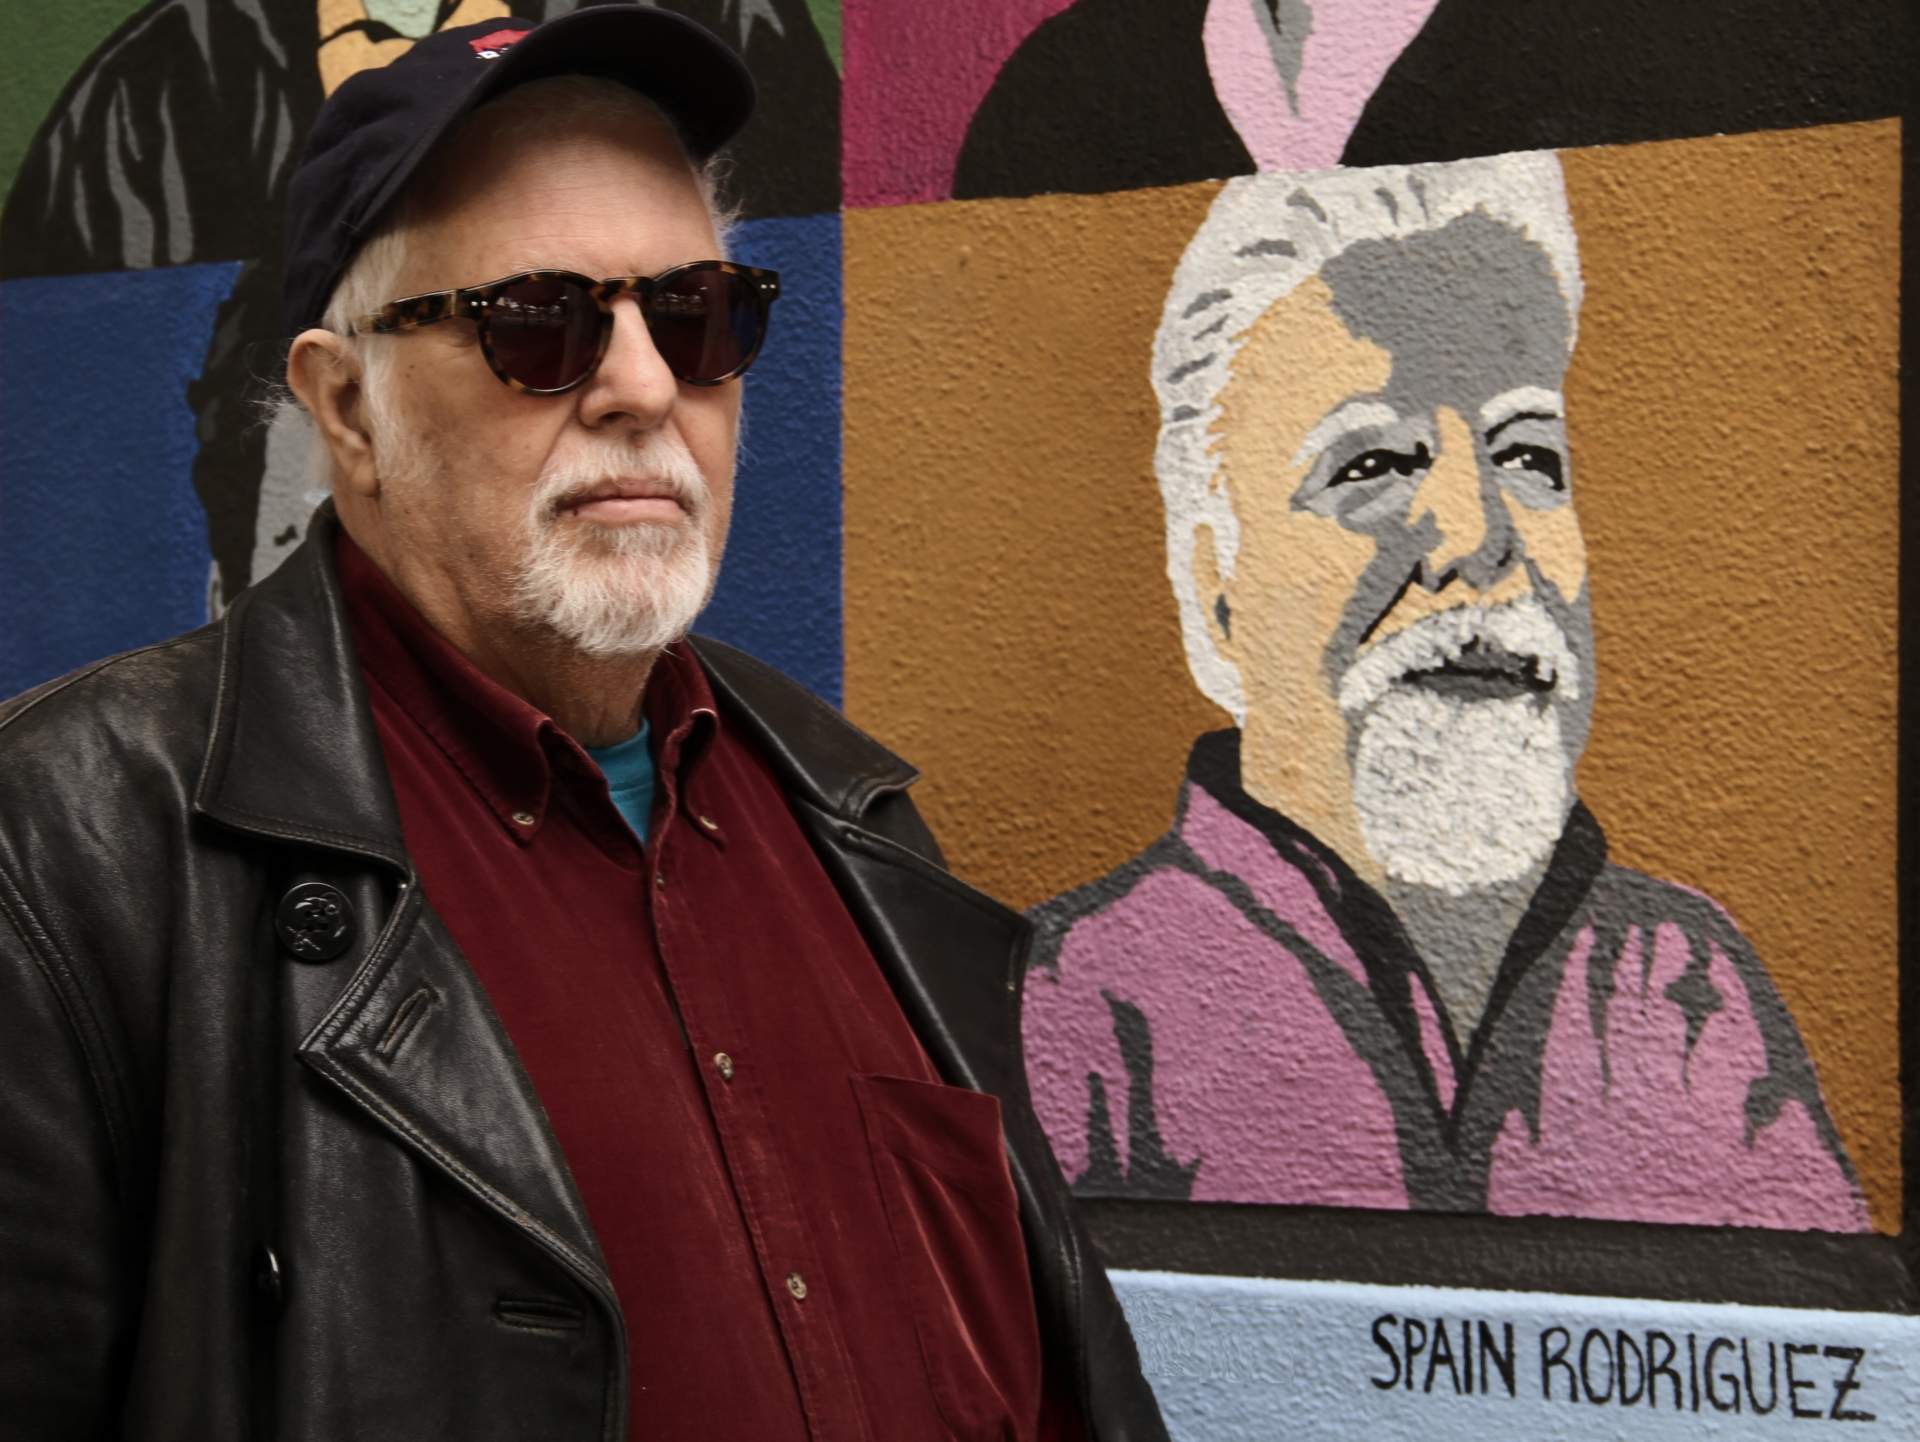 Heritage Moments: Mean streets, rock ’n’ roll and the underground genius of Spain Rodriguez